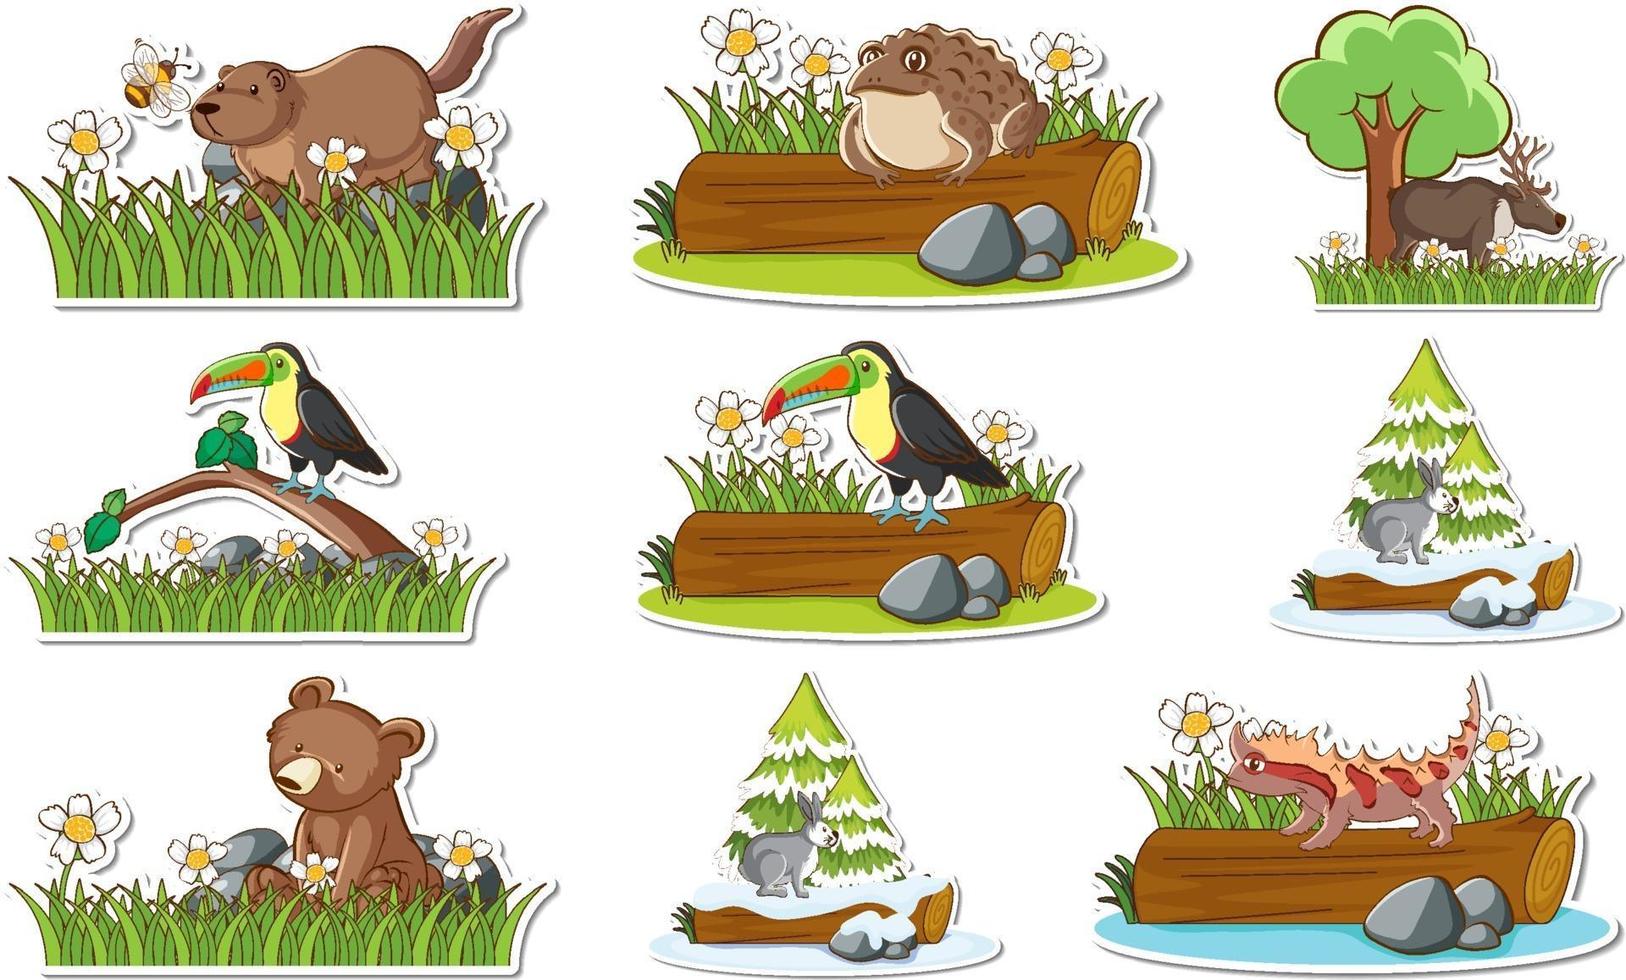 Sticker set with different wild animals and nature elements vector